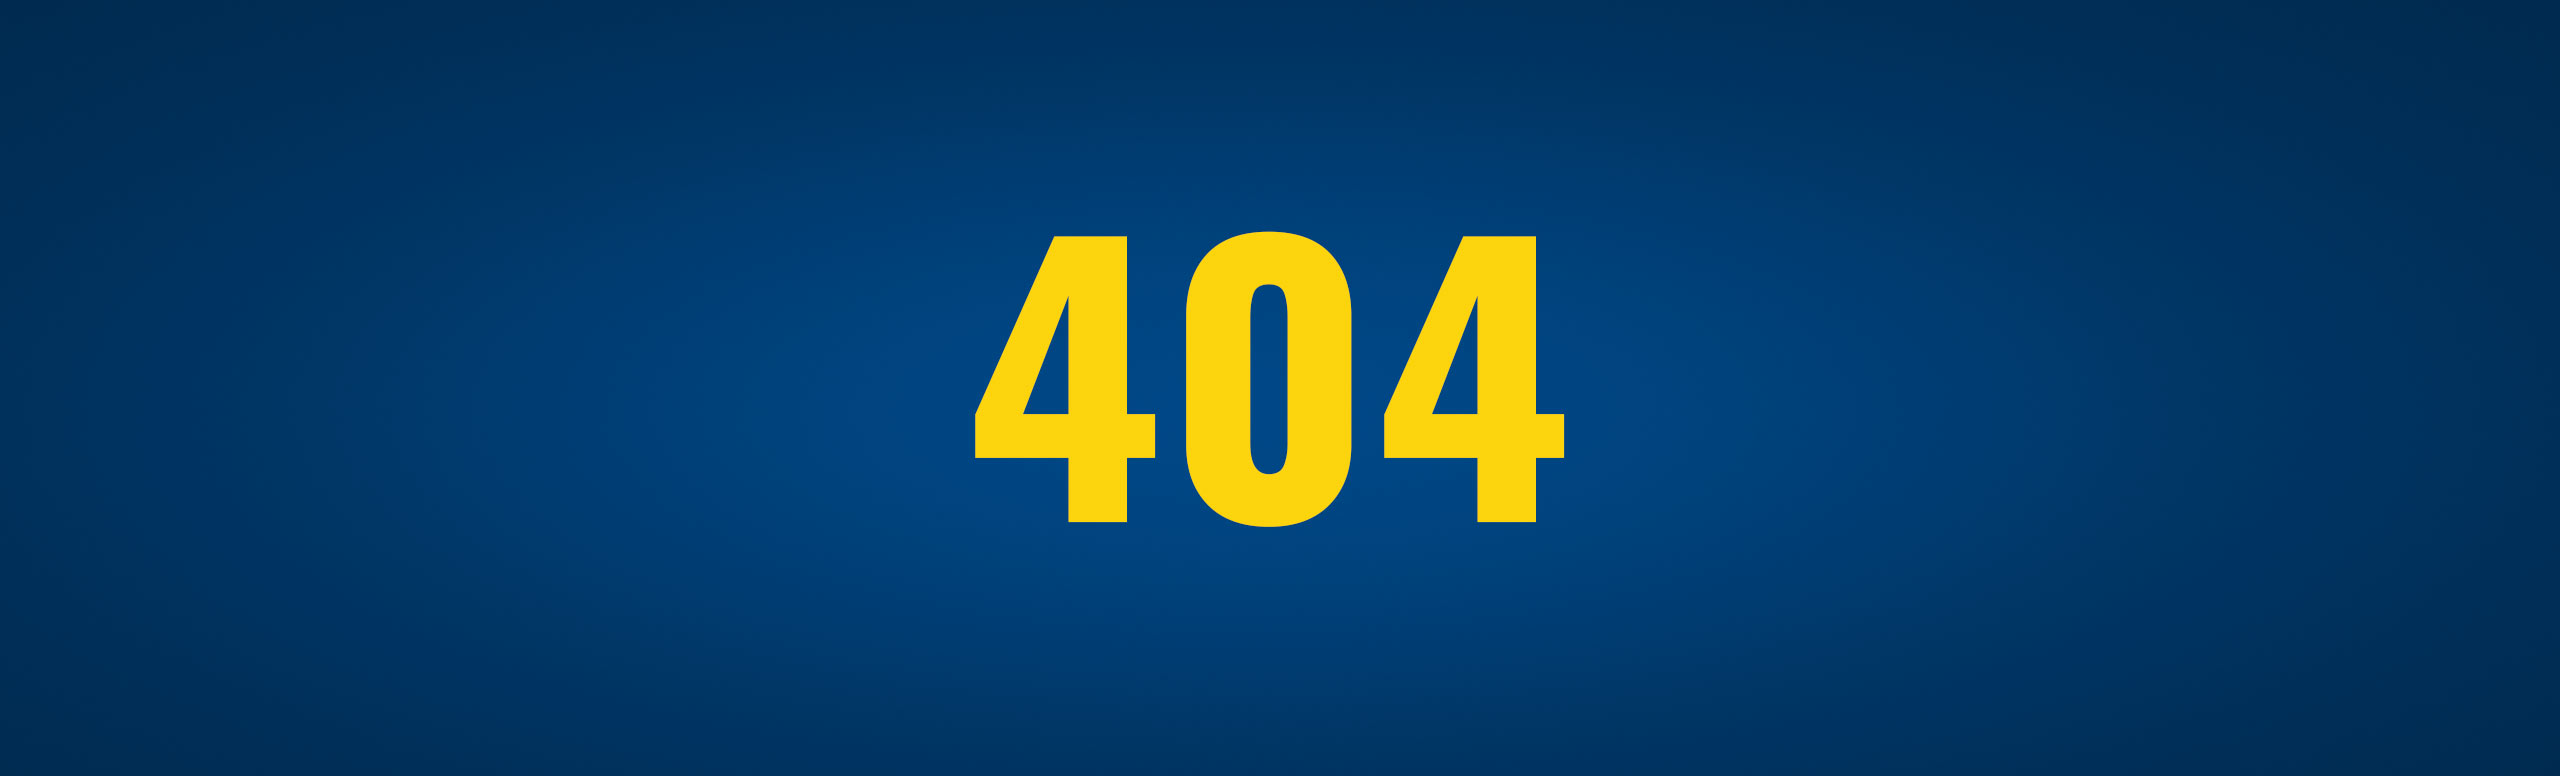 the number 404 in yellow over a blue background